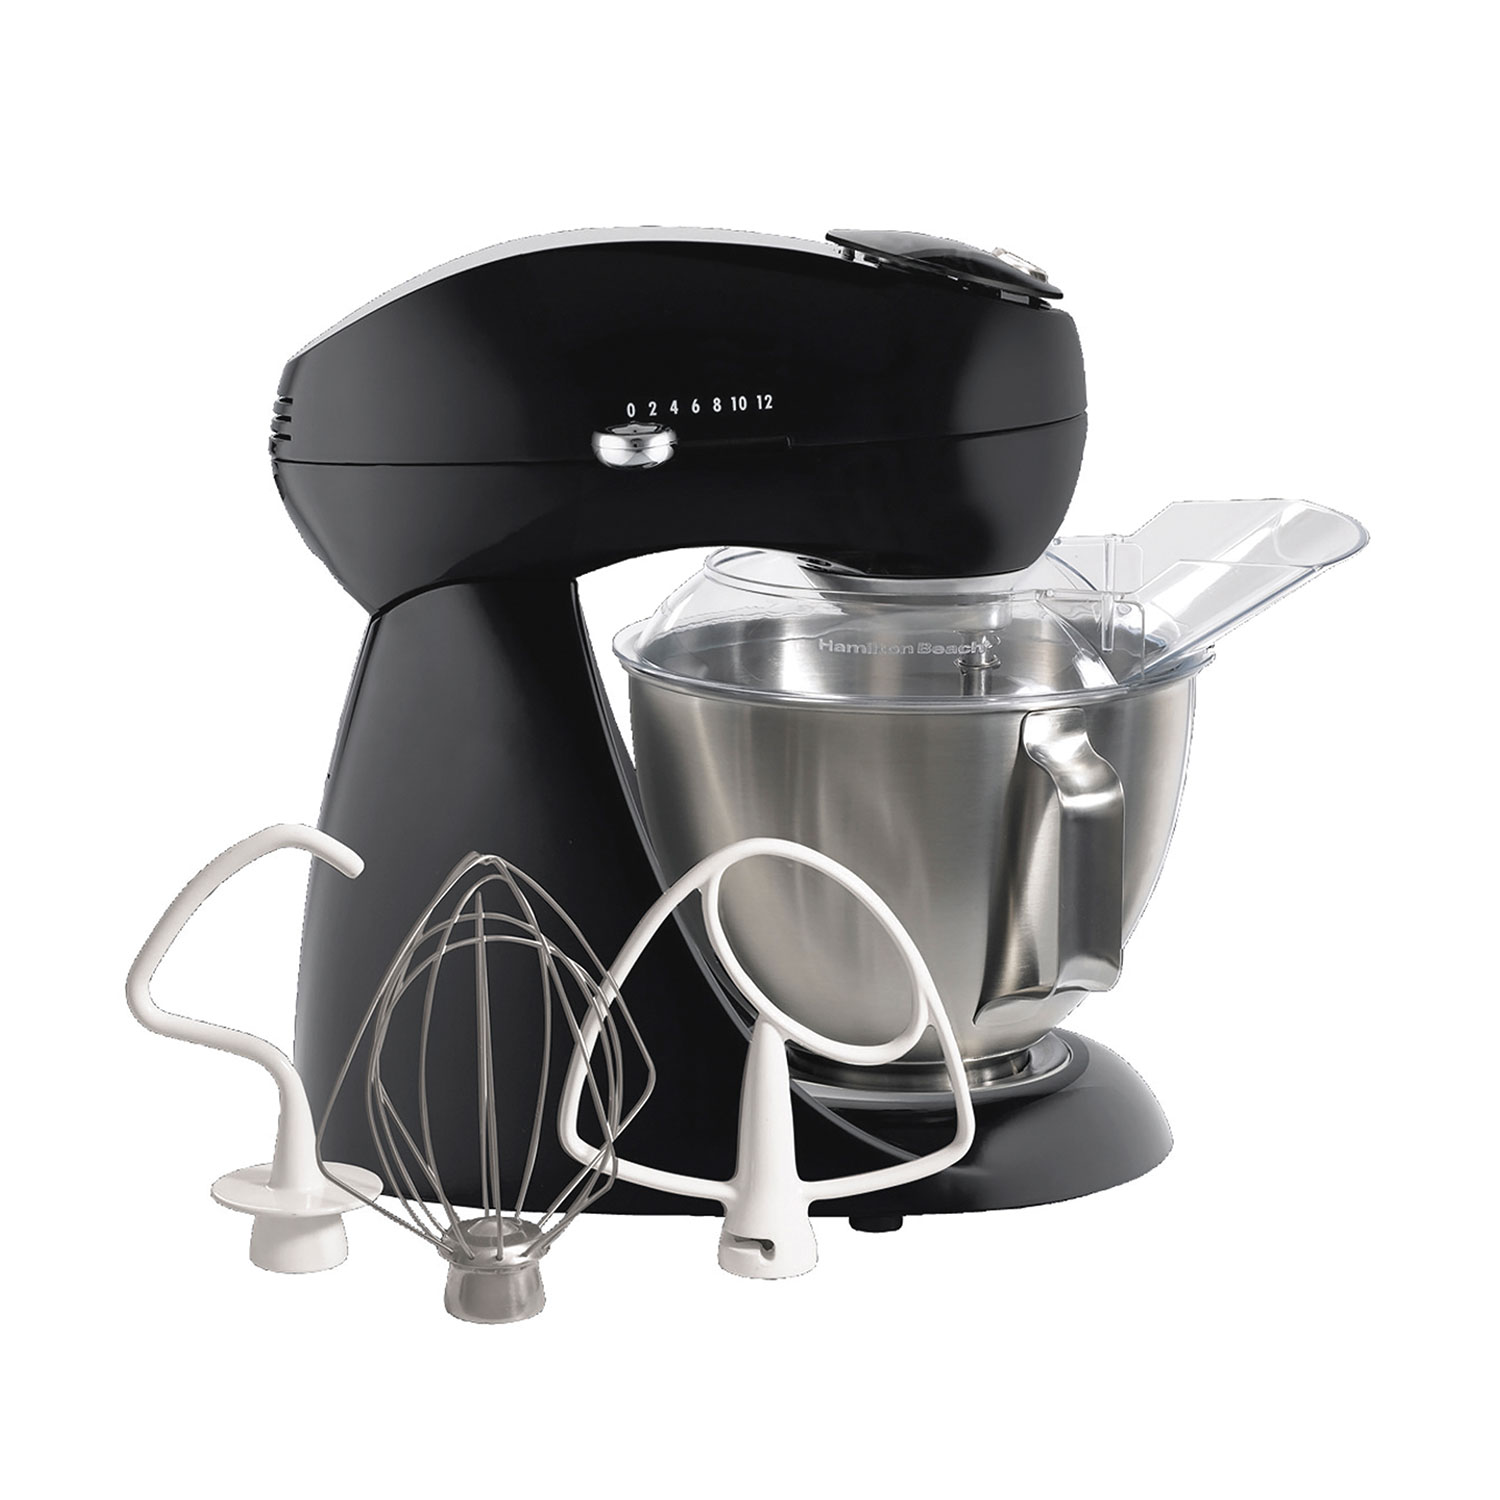 Eclectrics® Licorice (Black) All-Metal Stand Mixer (63227)